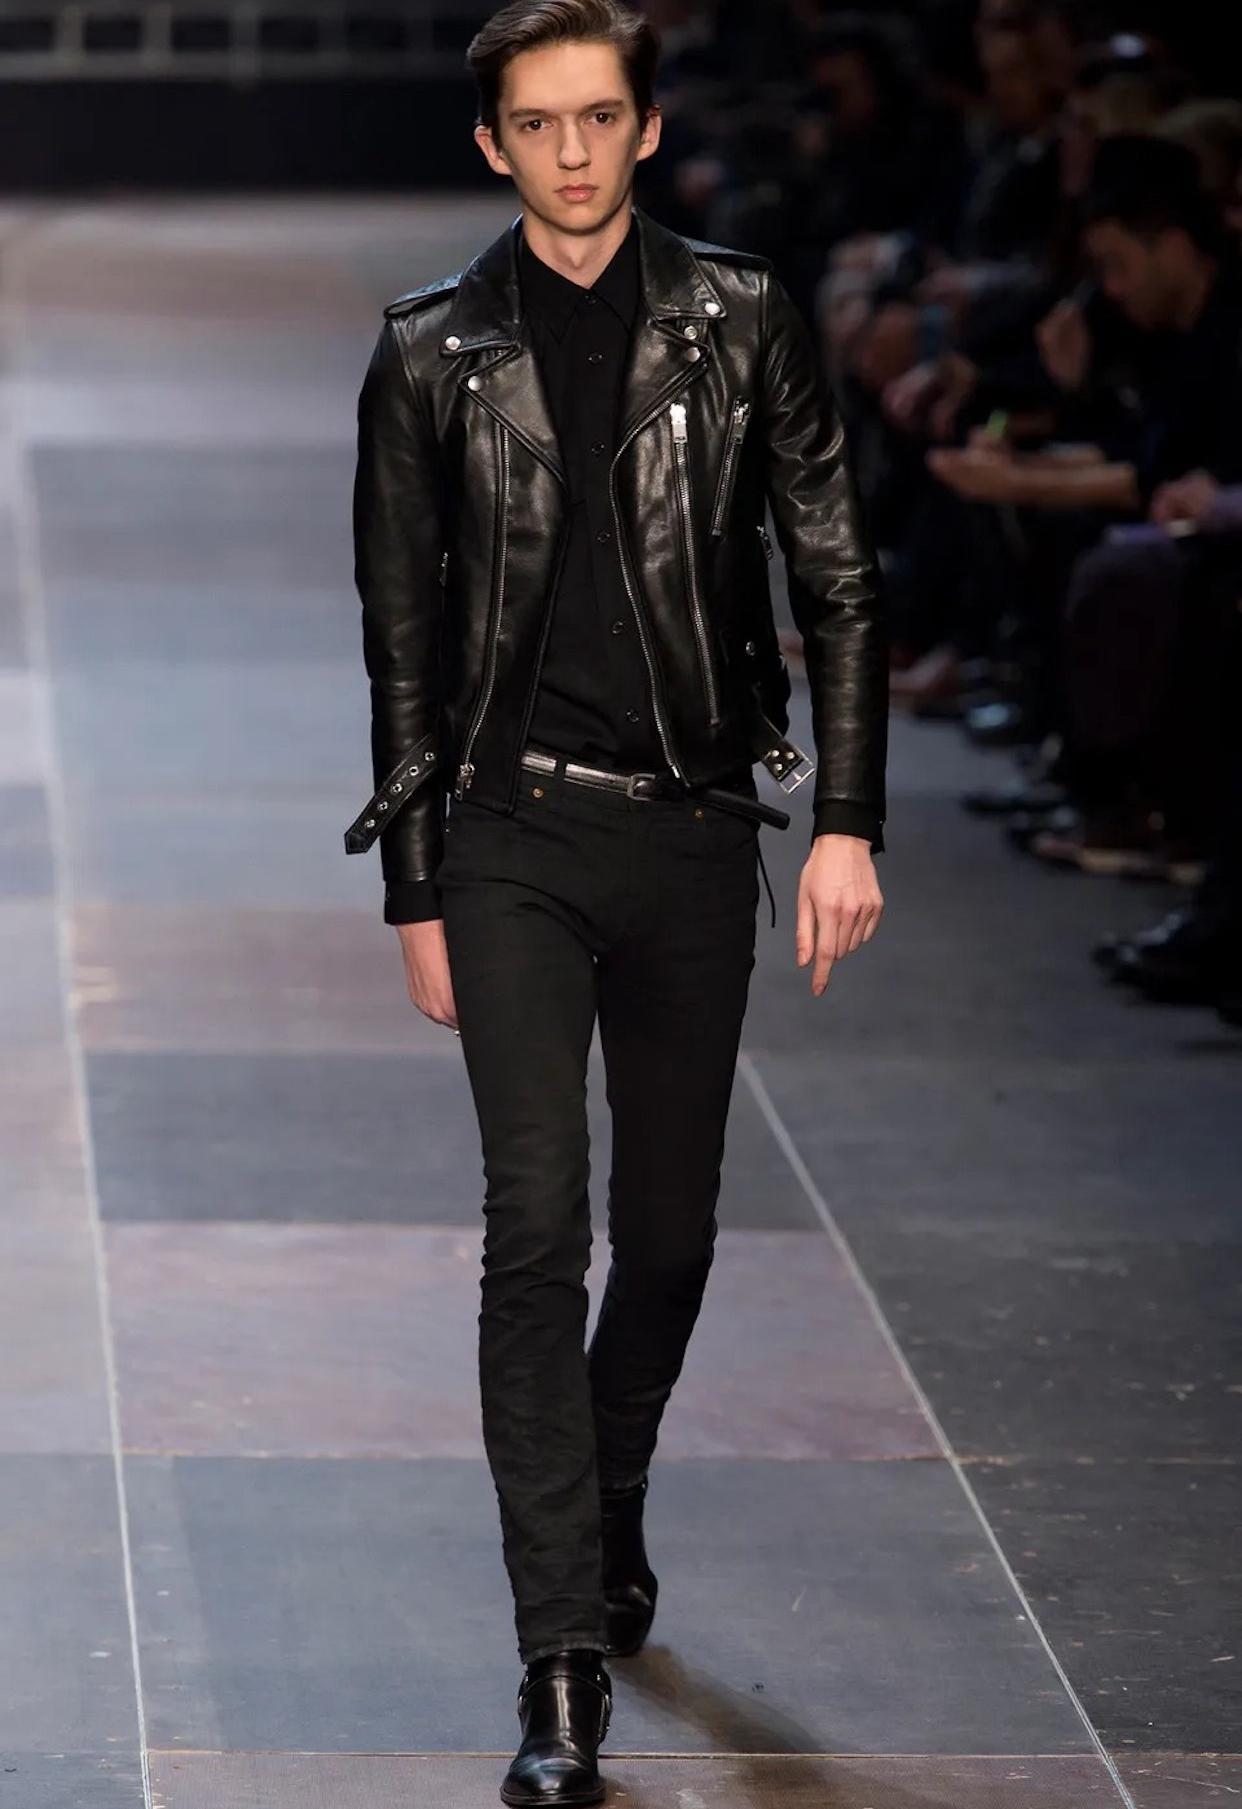 SAINT LAURENT by HEDI SLIMANE 2013 L01 Biker Jacket 44

Brand: Saint Laurent
Designer: Hedi Slimane
Collection / Year: 2013
Fabric: Leather
Color: Black
Size: 44

Iconic Hedi Slimane. The L01 biker jacket by Saint Laurent was first introduced by